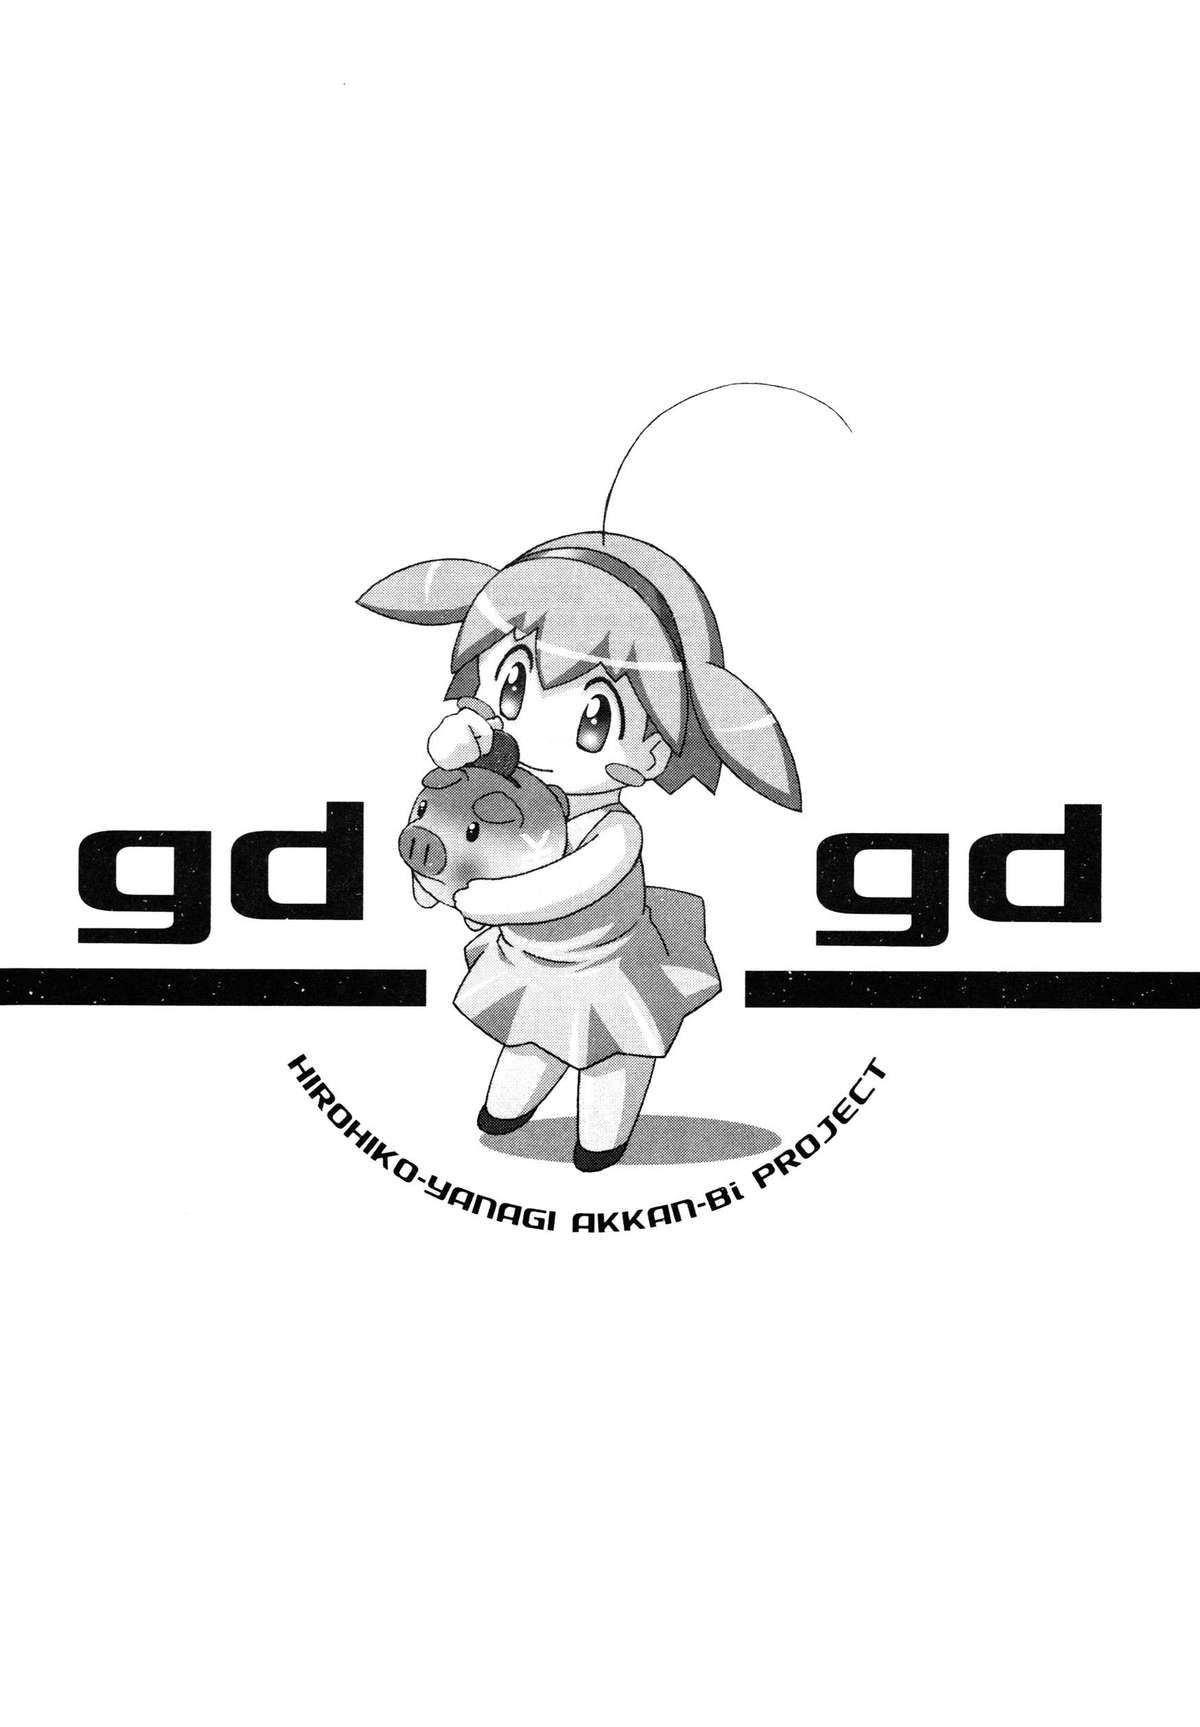 gdgd 11